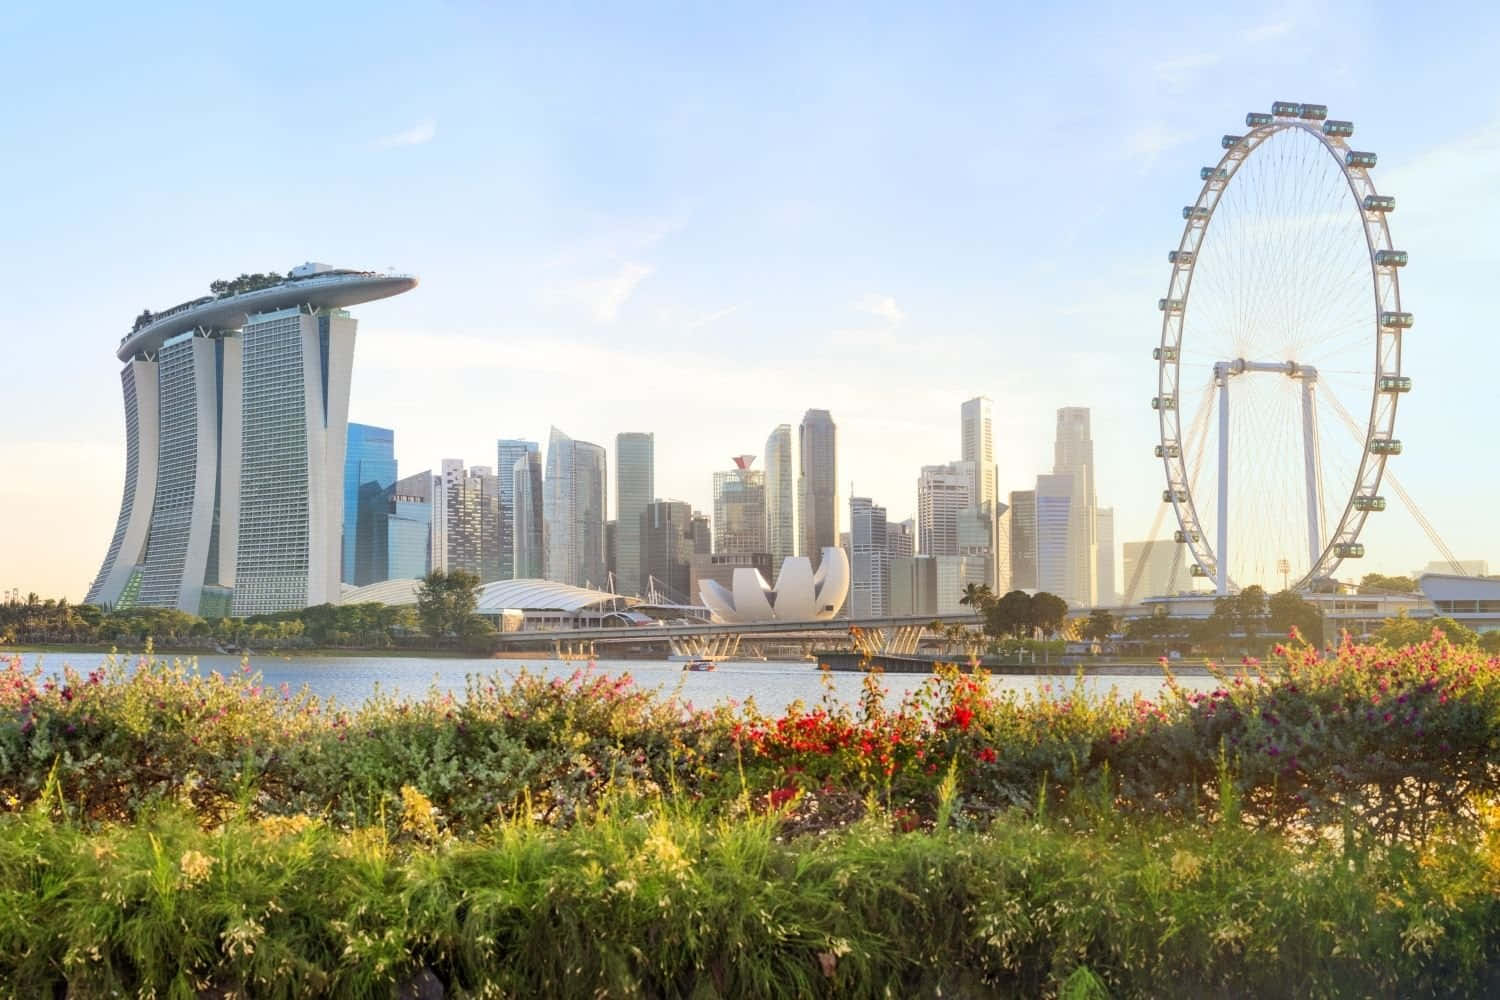 Welcome to Singapore, the Gem of South East Asia